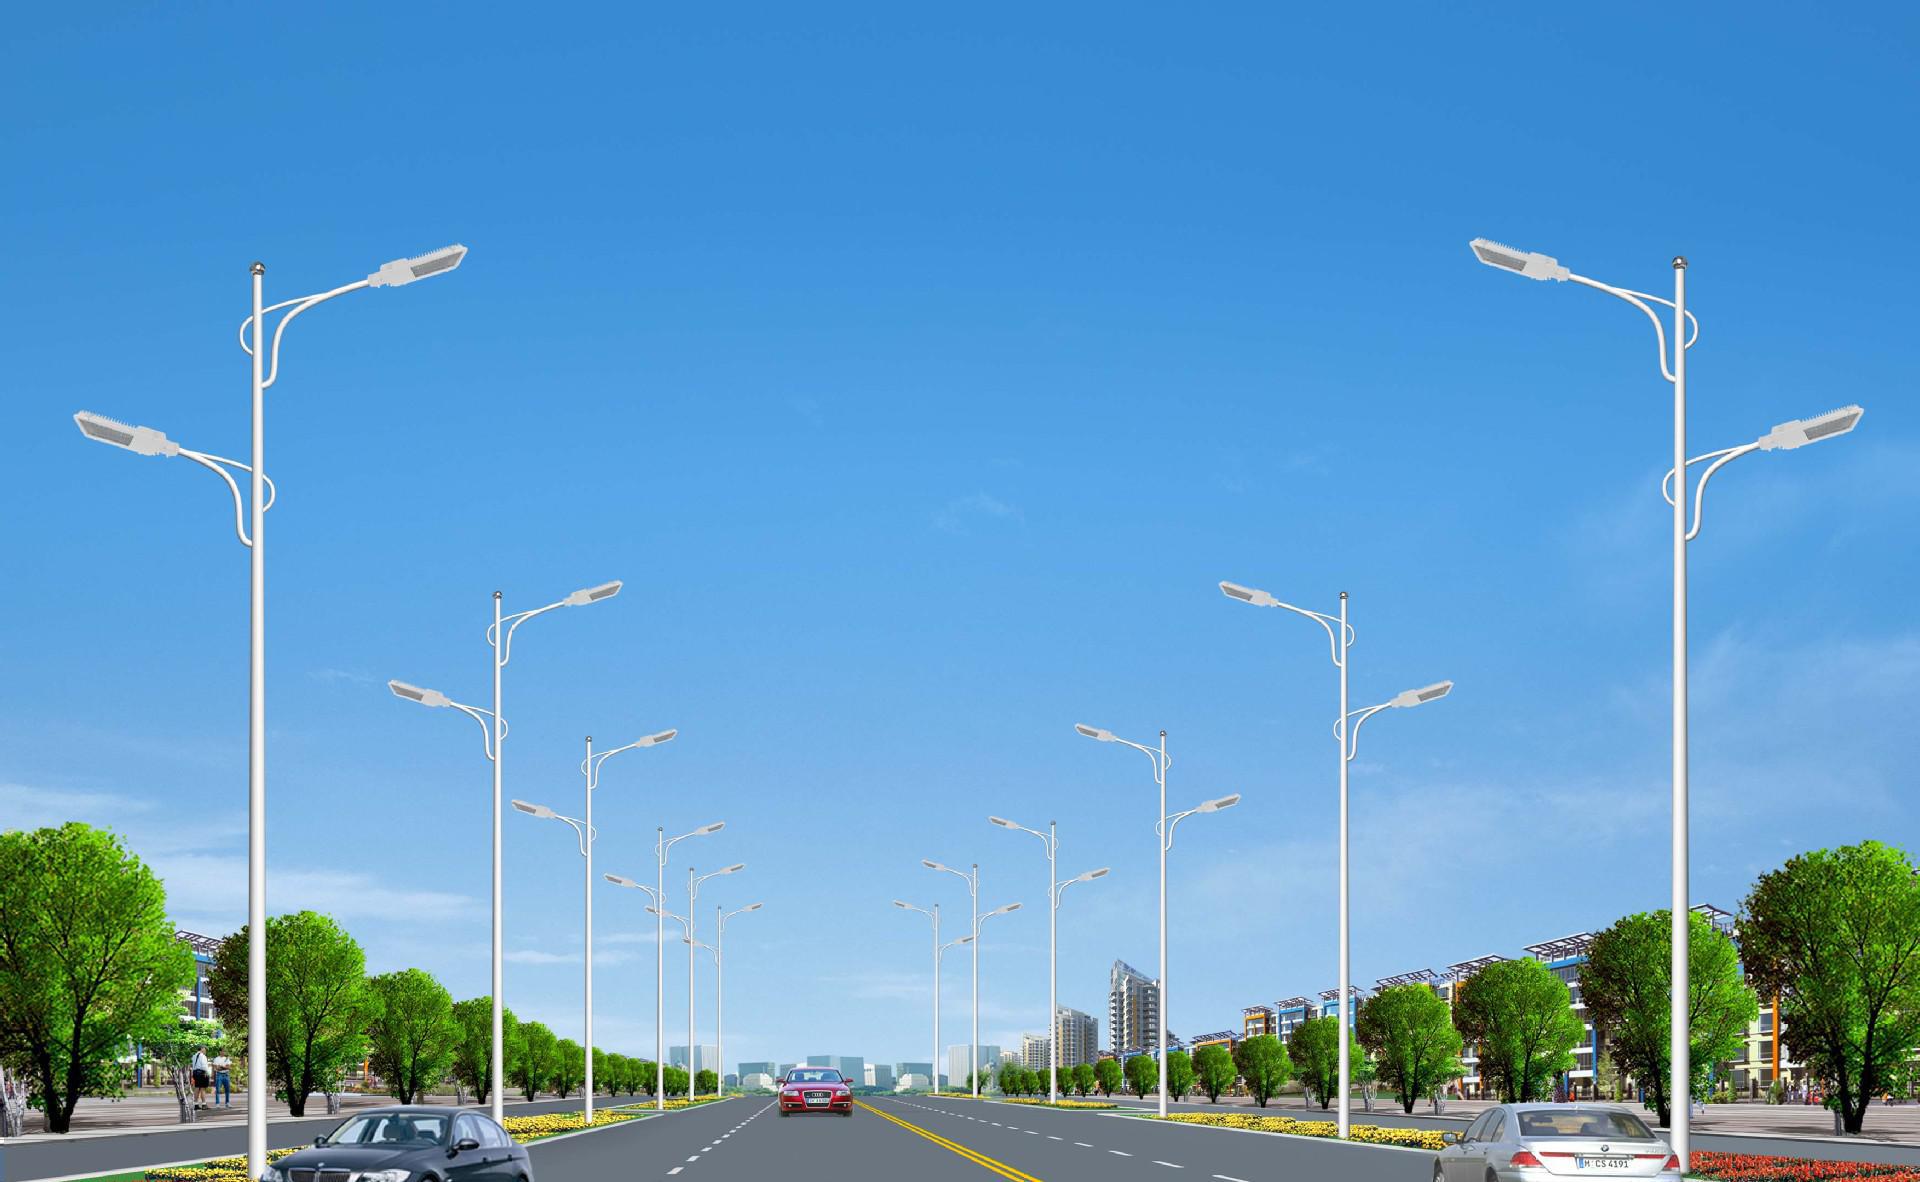 The Common Market Problems of LED Street Lights